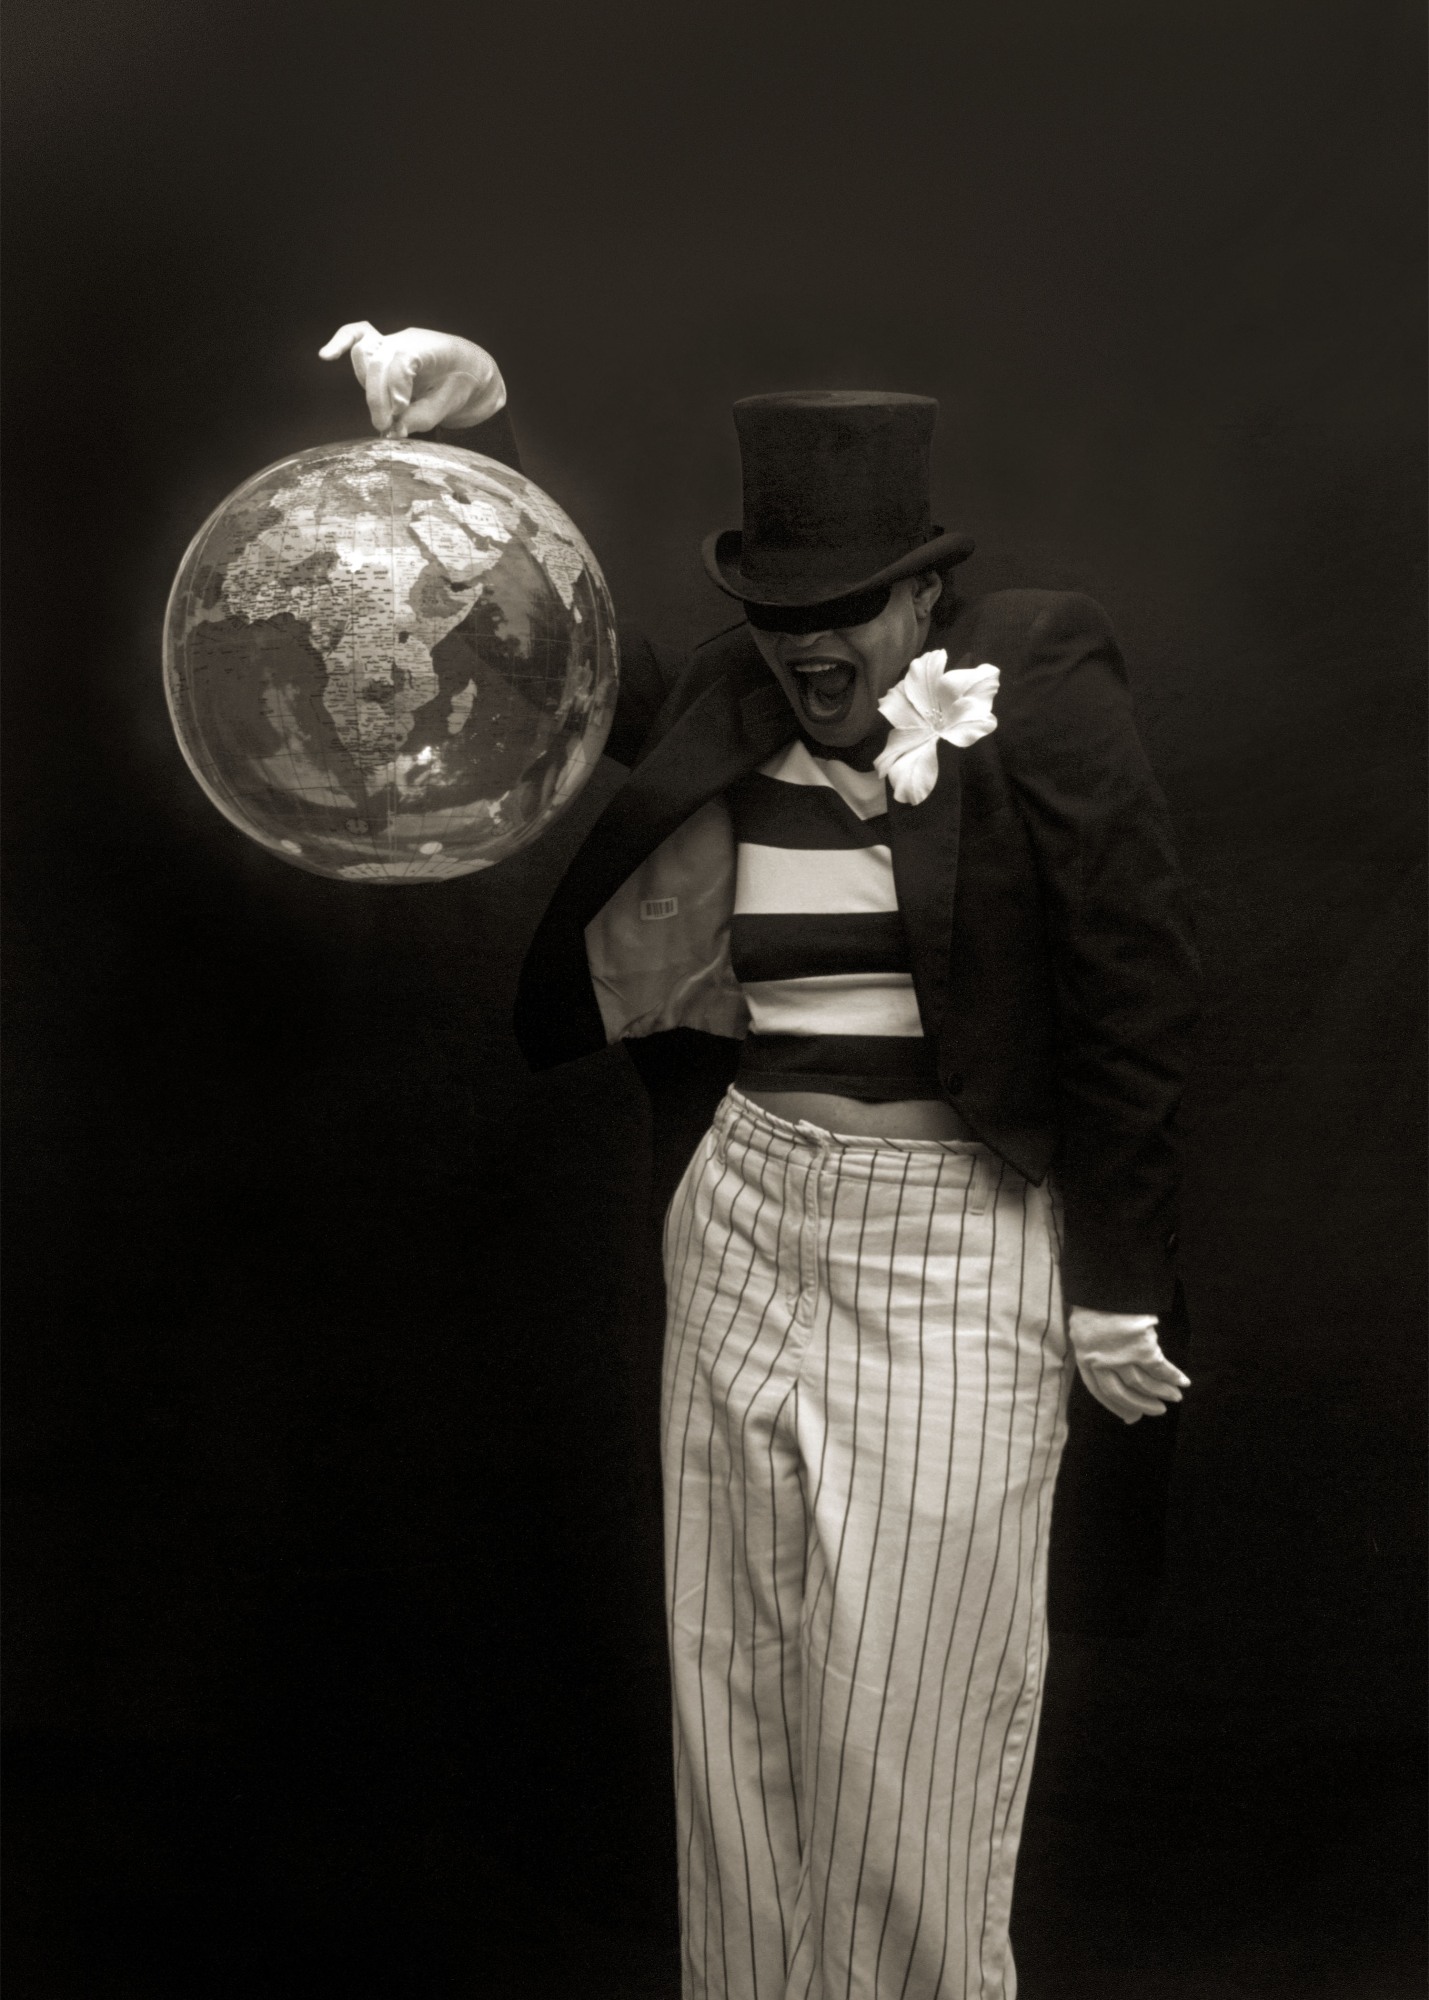 Artist Carrie Mae Weems in black tophat, eye mask, holding a globe in an outstretched white gloved-hand